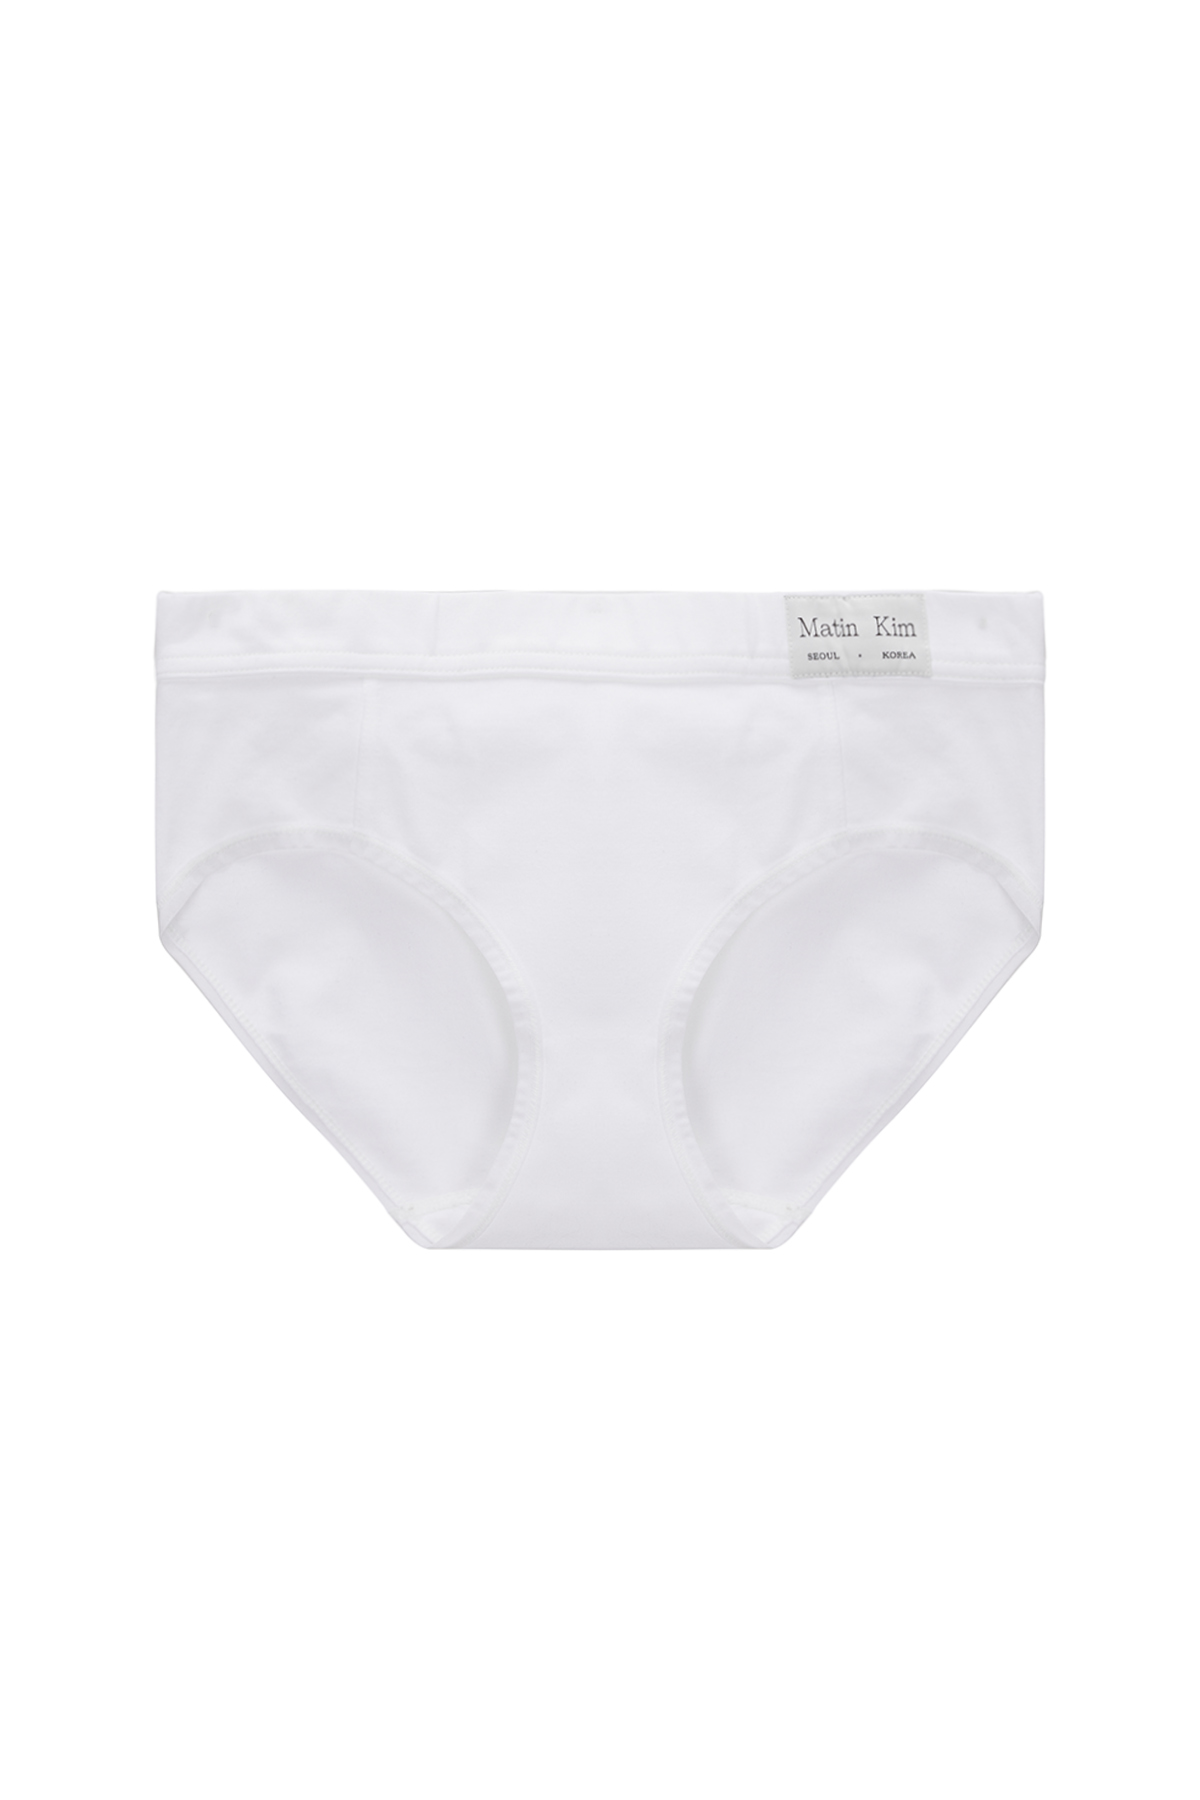 ACTIVE BOXERS BRIEF IN WHITE